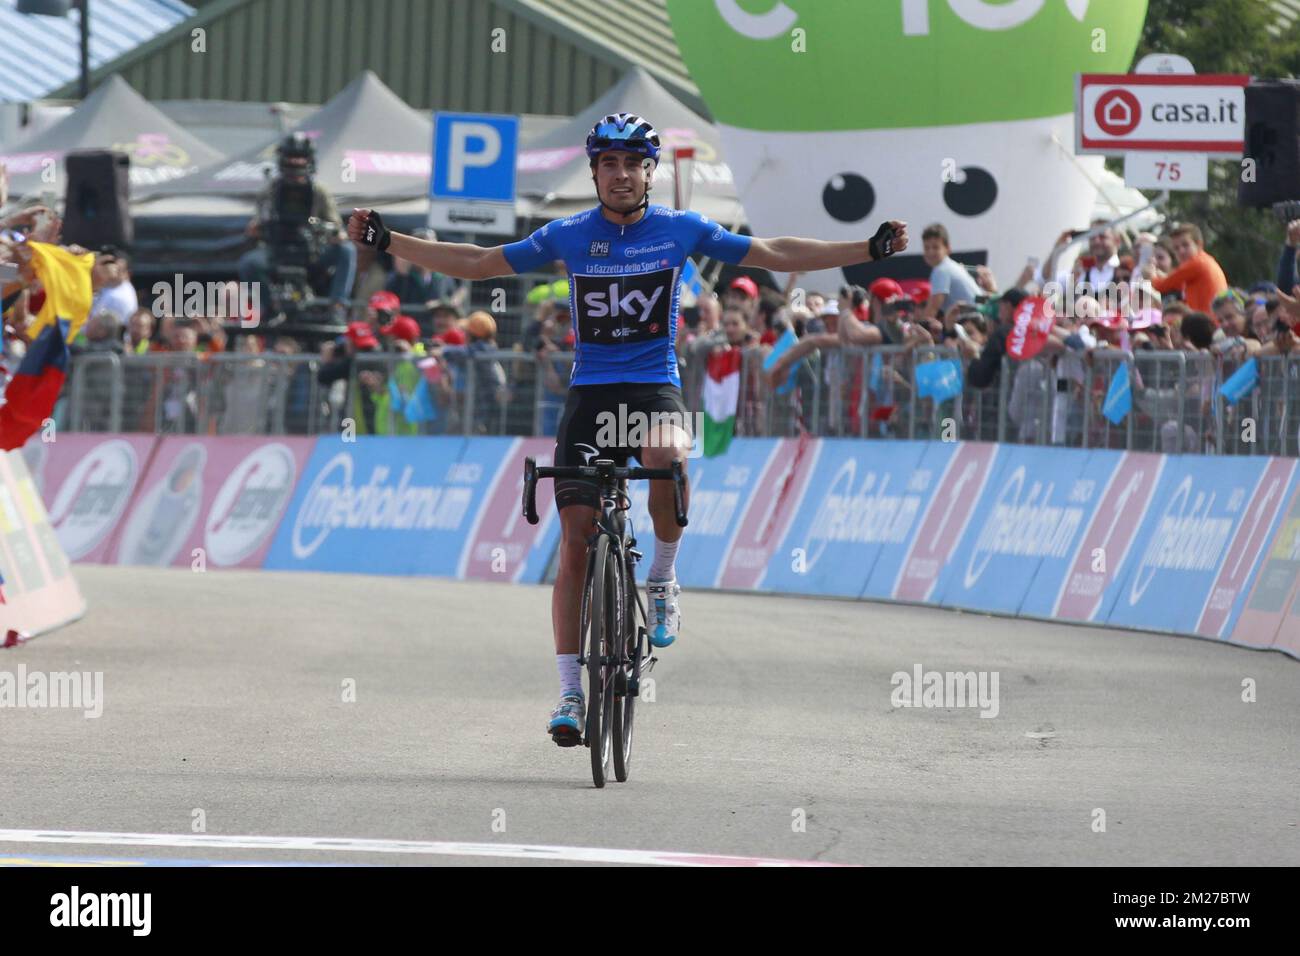 Spanish Mikel Landa of Team Sky celebrates as he crosses the finish line to win the nineteenth stage of the Giro 2017 cycling tour, 191 km from San Candido/Innichen to Piancavallo, Italy, Friday 26 May 2017. BELGA PHOTO YUZURU SUNADA  Stock Photo